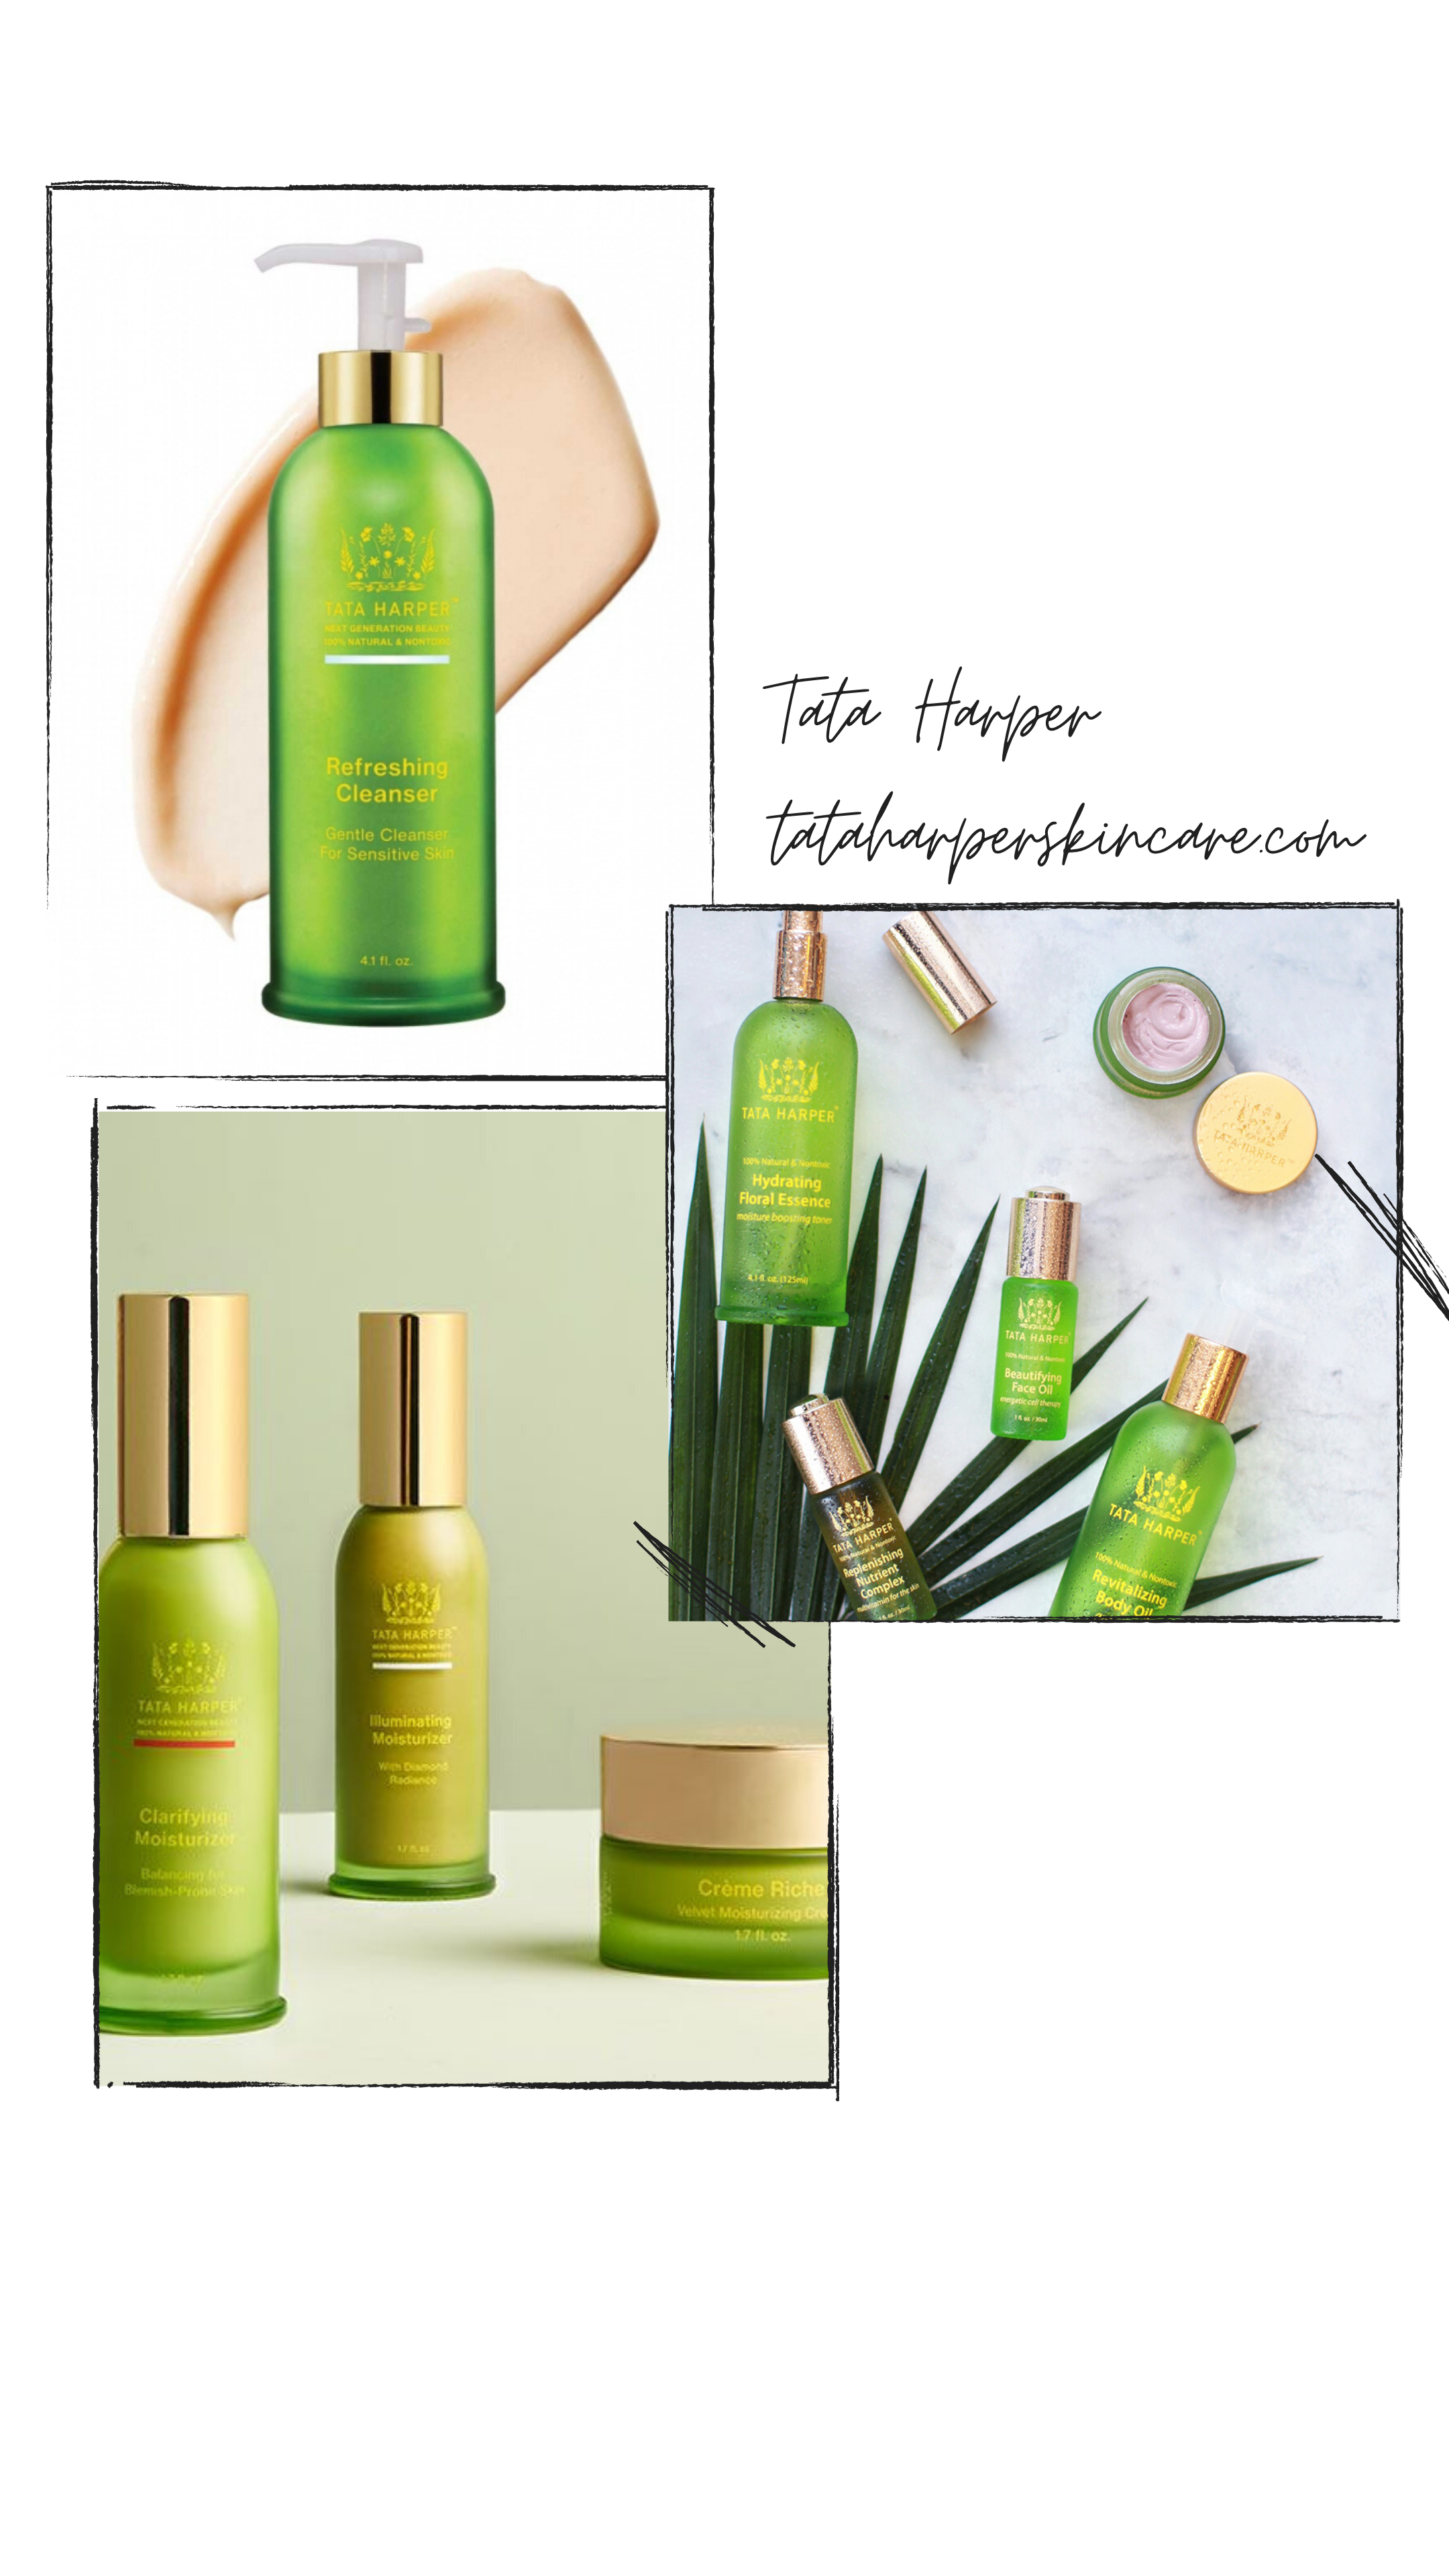 Images from tataharperskincare.com